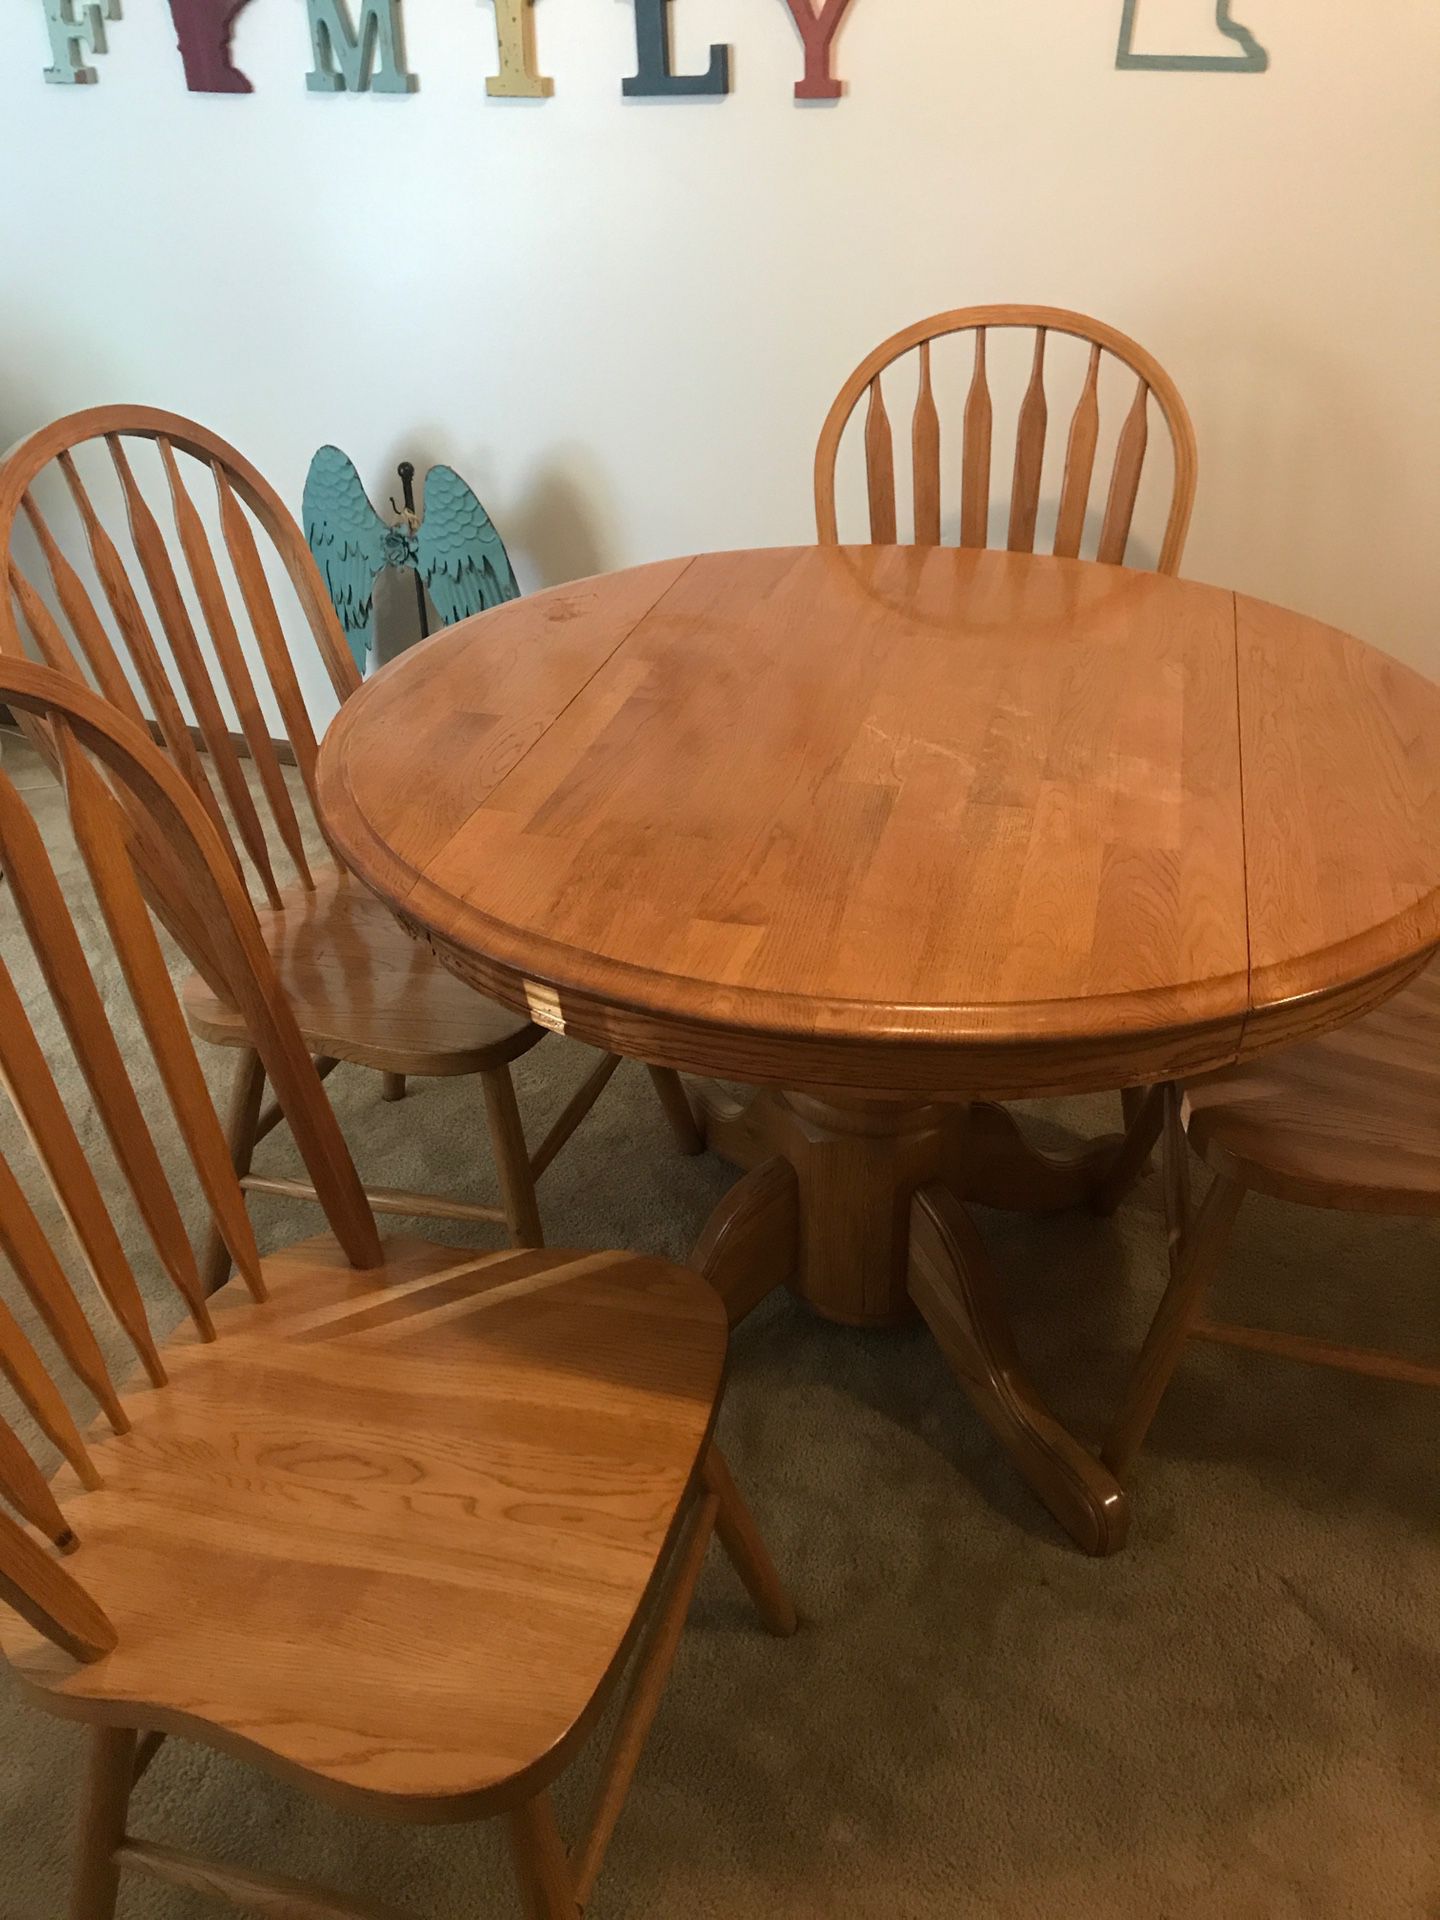 FREE DINING ROOM TABLE SET!